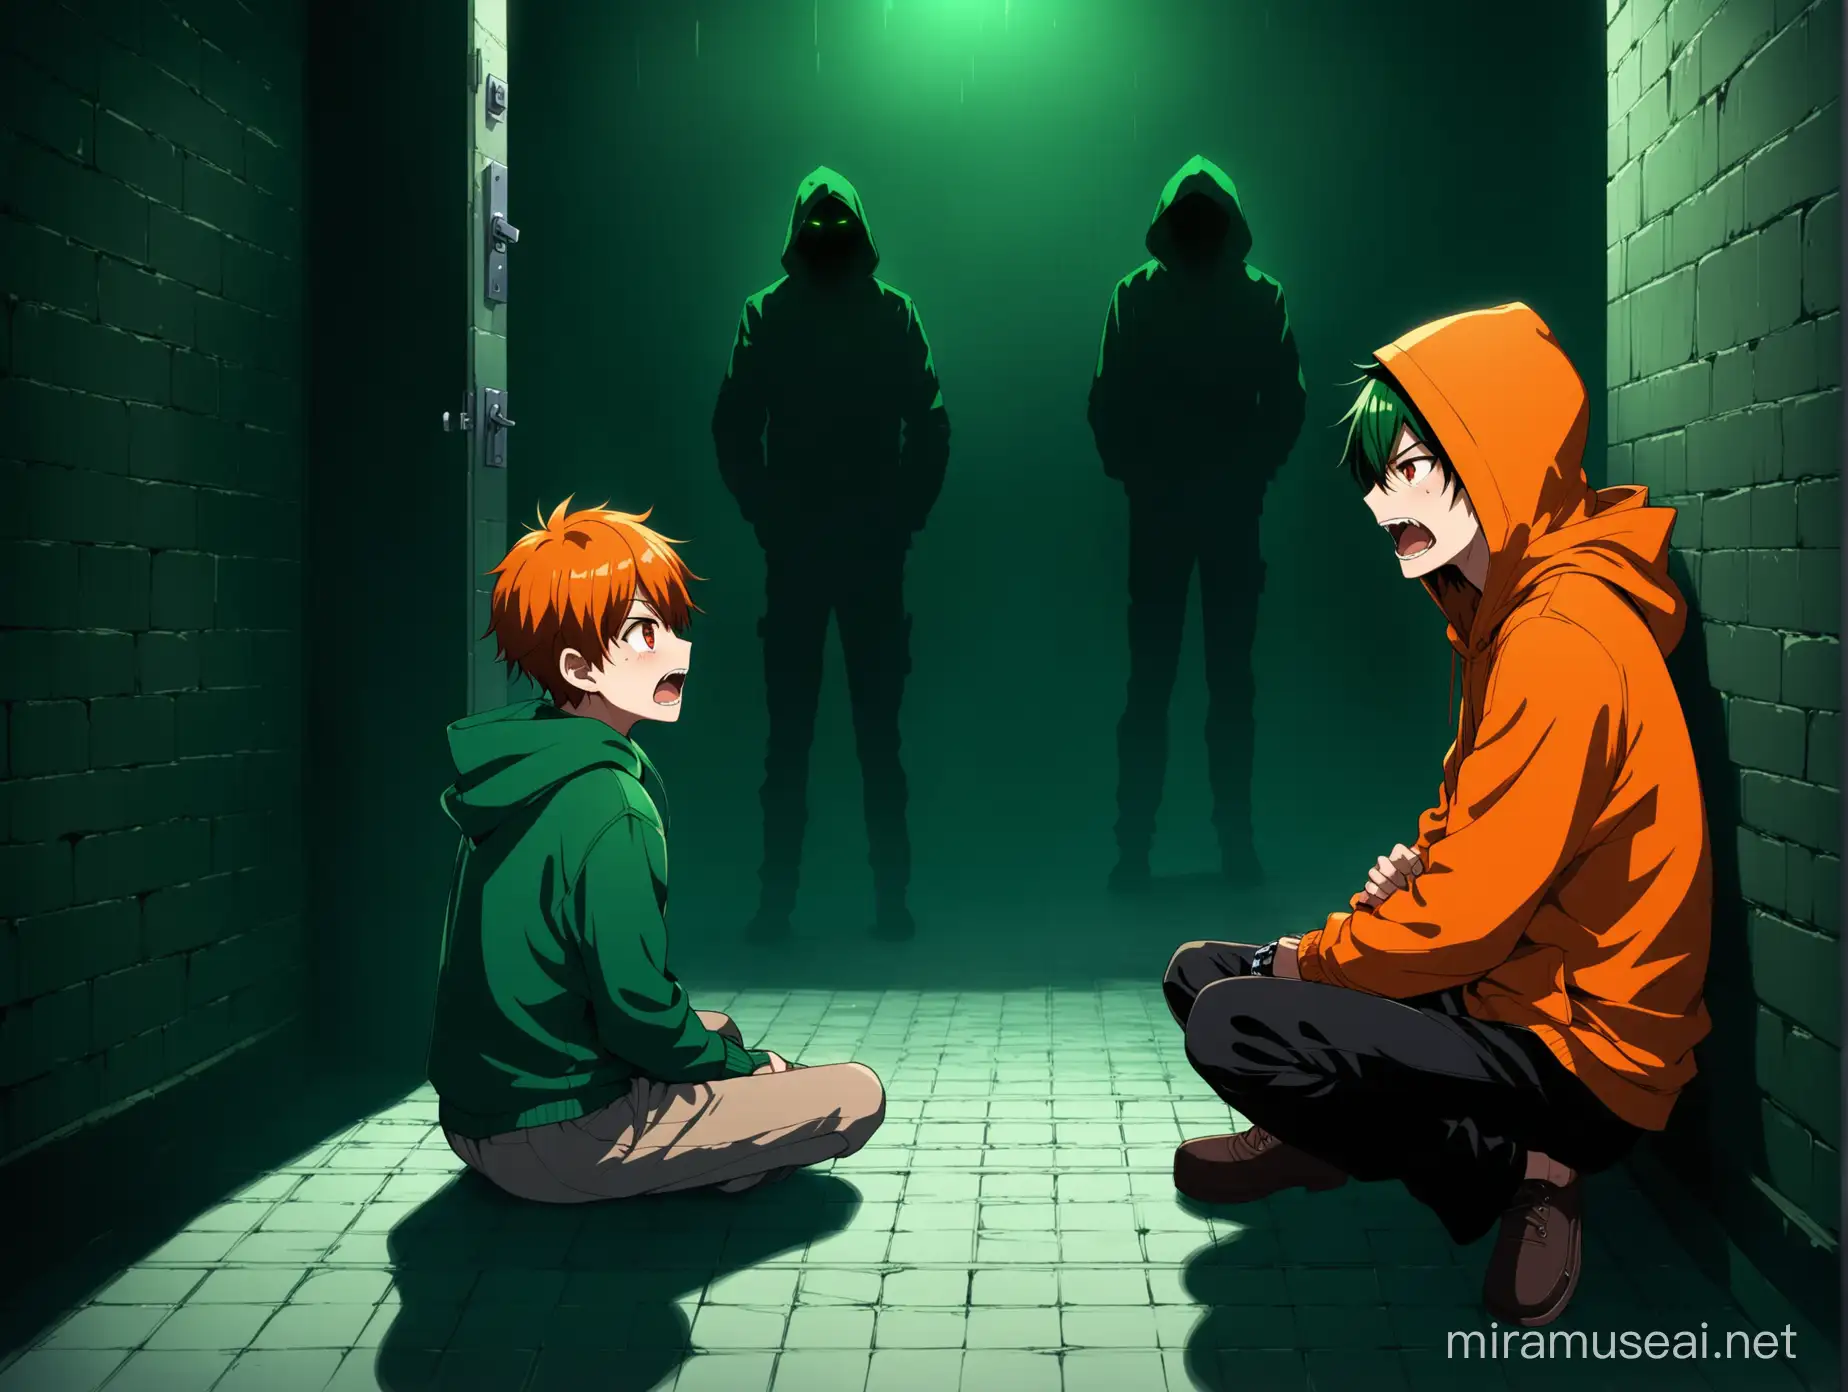 Anime Characters Conversation in Underground Secret Room Handcuffed Boys Shocking Encounter